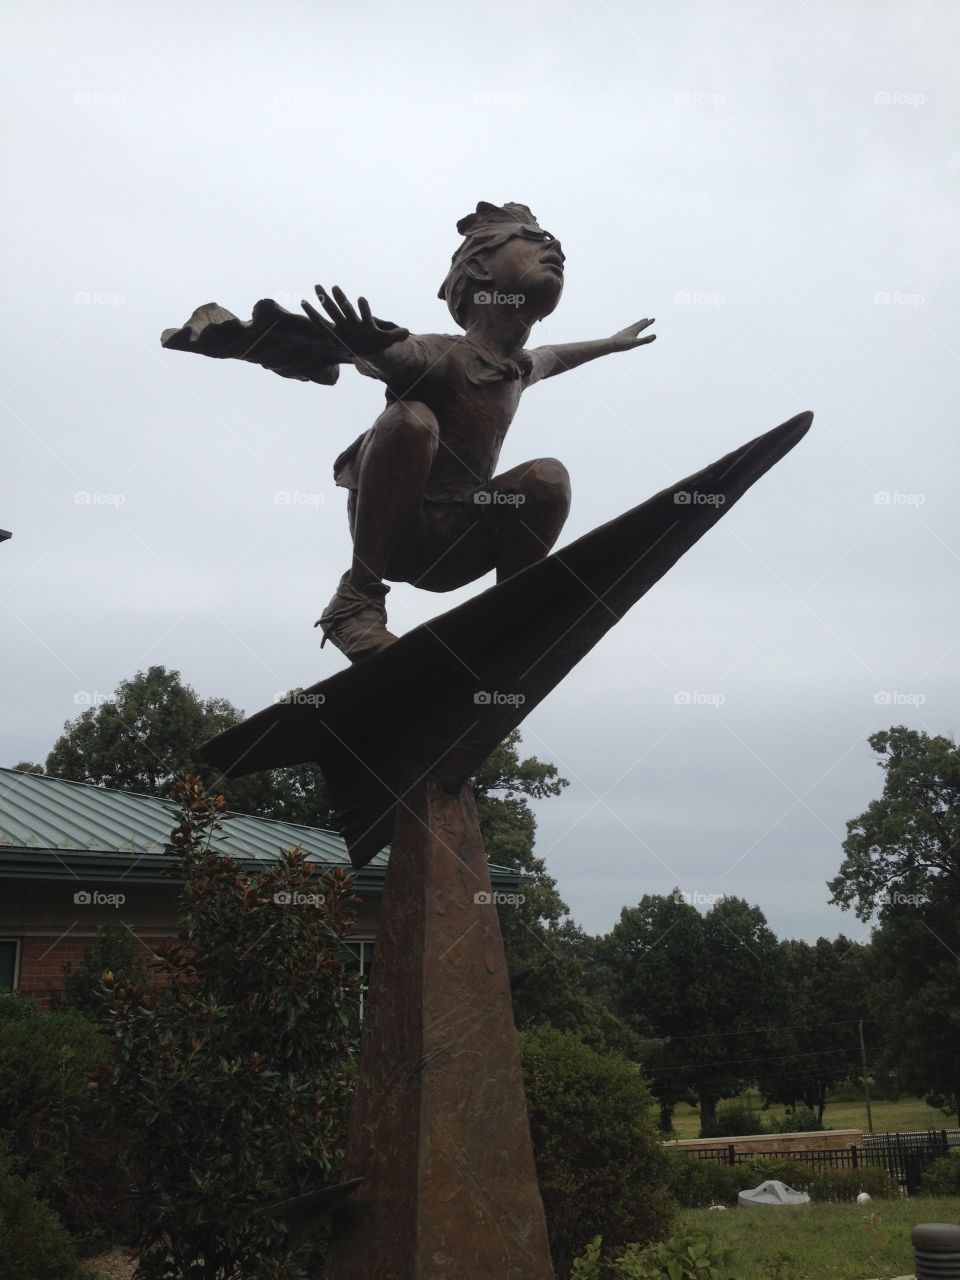 Sculpture of a child flying